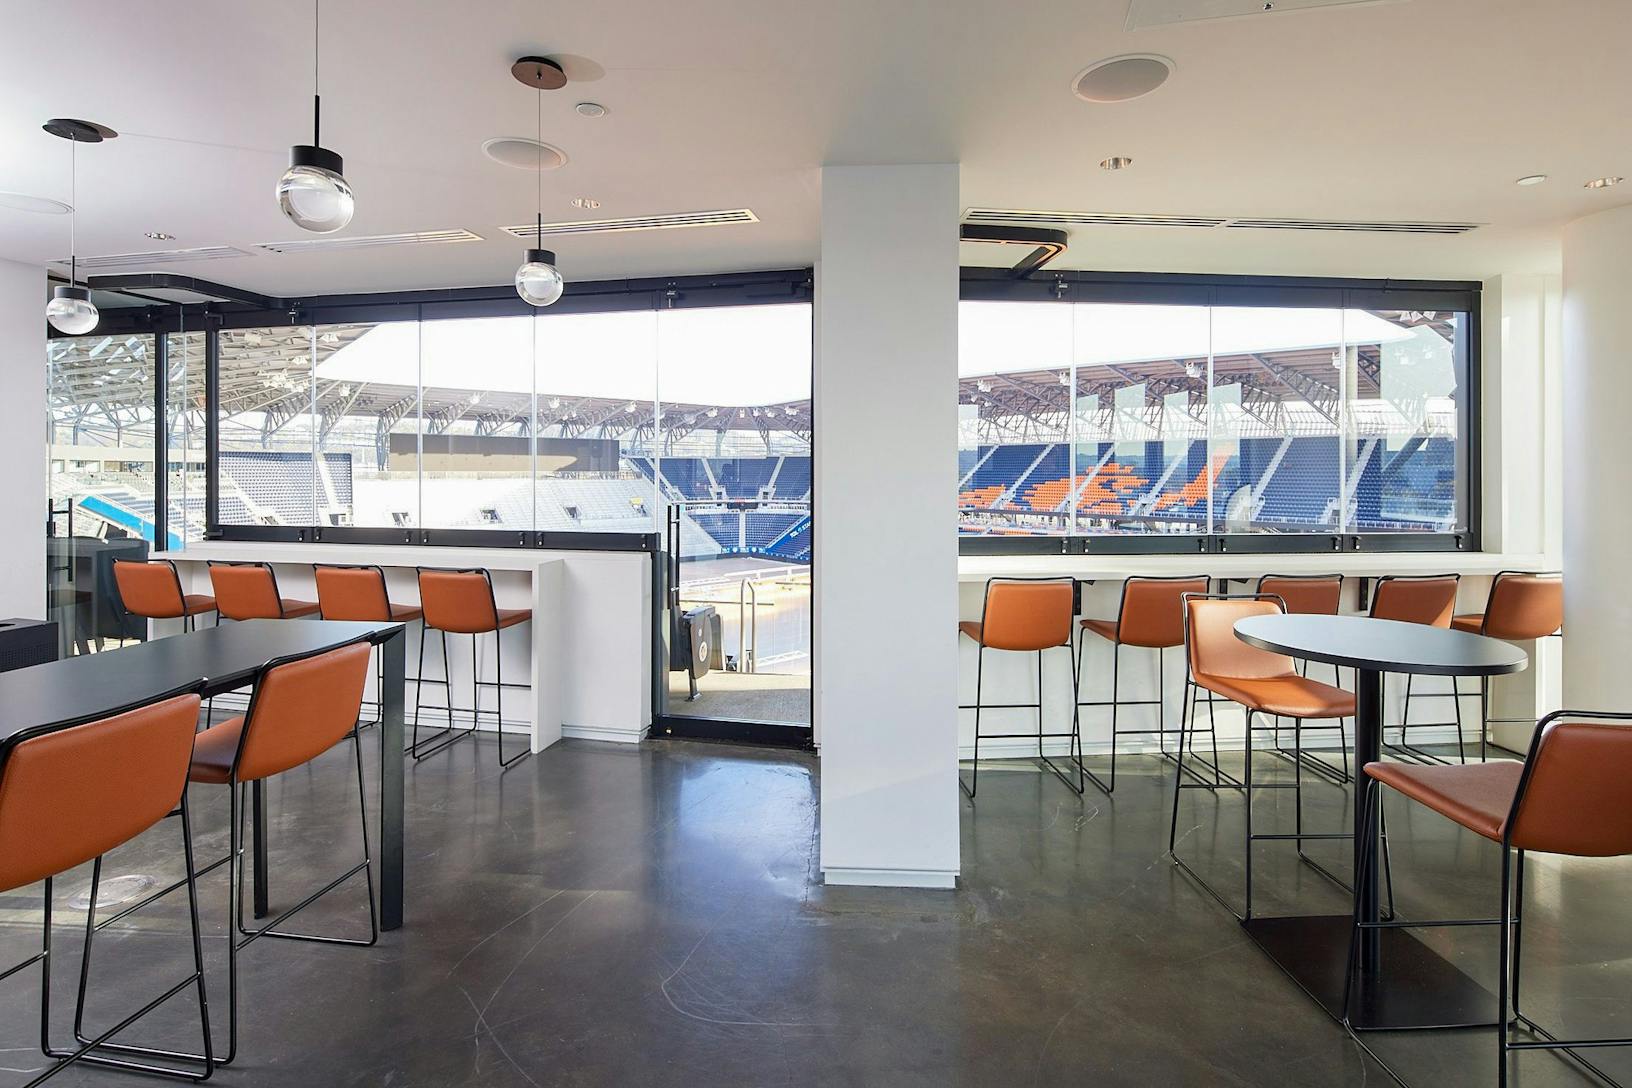 Suite with a bar with orange stools and A bar with orange stools and a Single Track Sliding view of a stadium